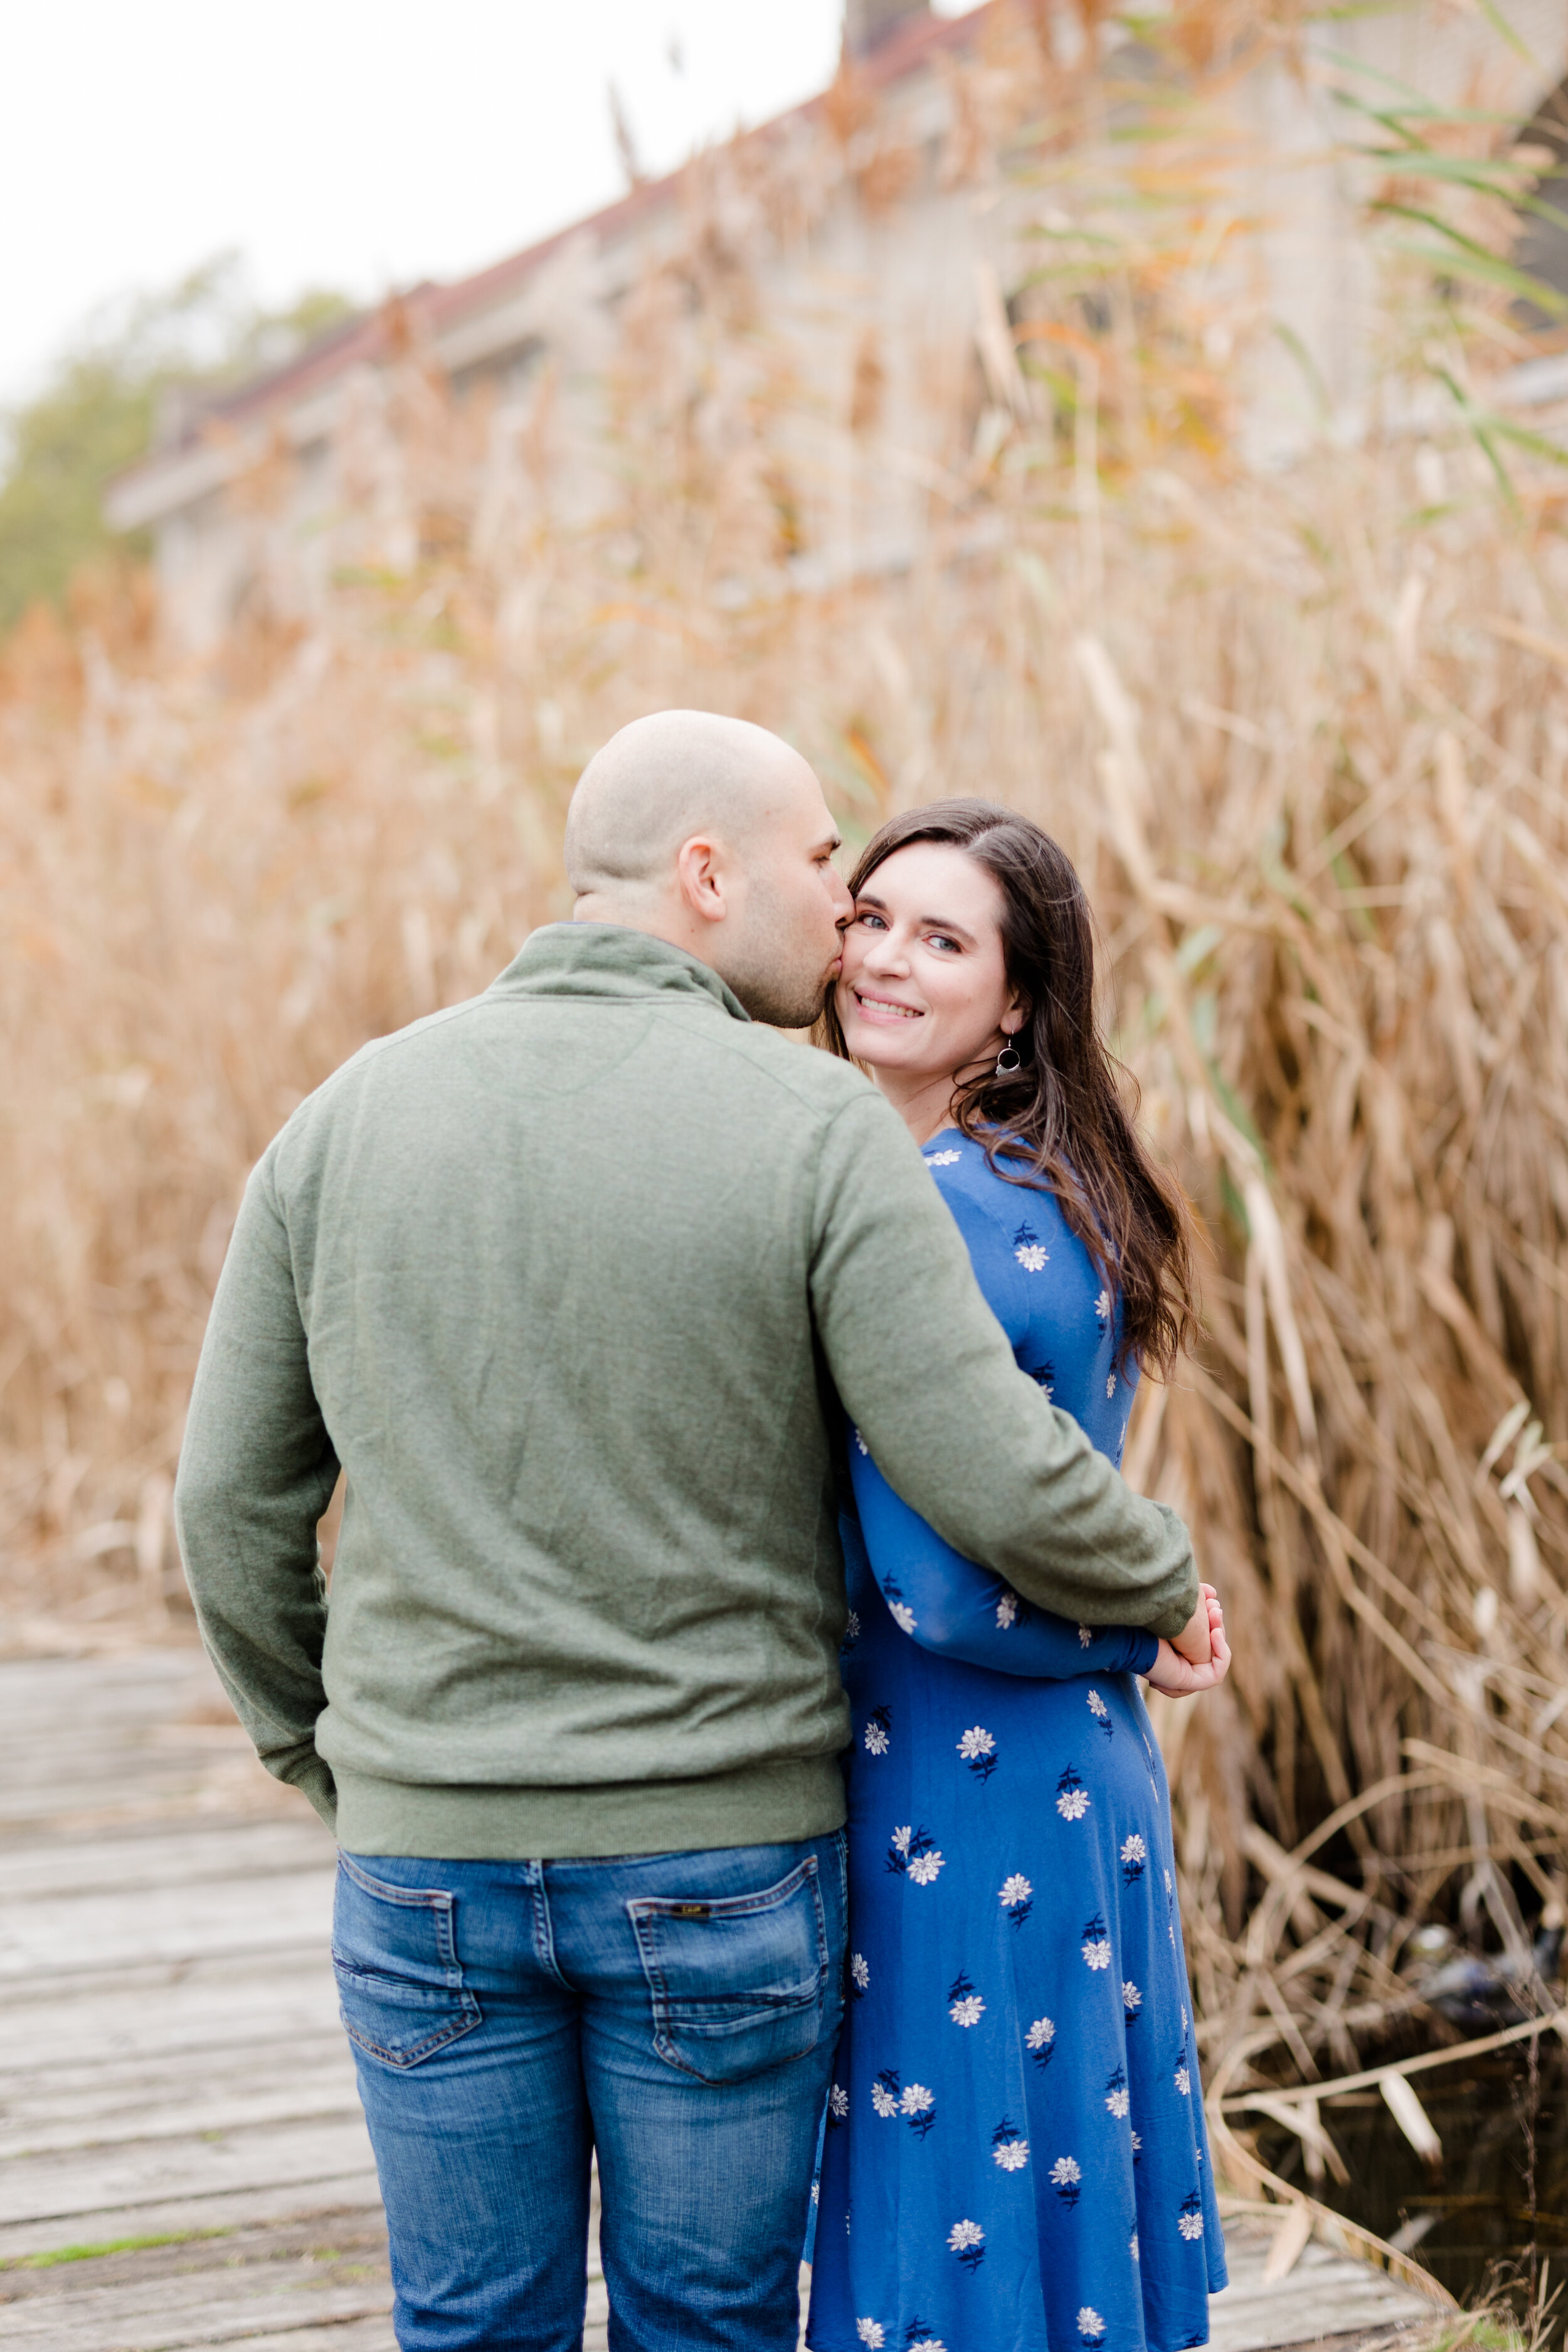 South-Philly-FDR-Park-Fall-Engagement-Session-21.jpg